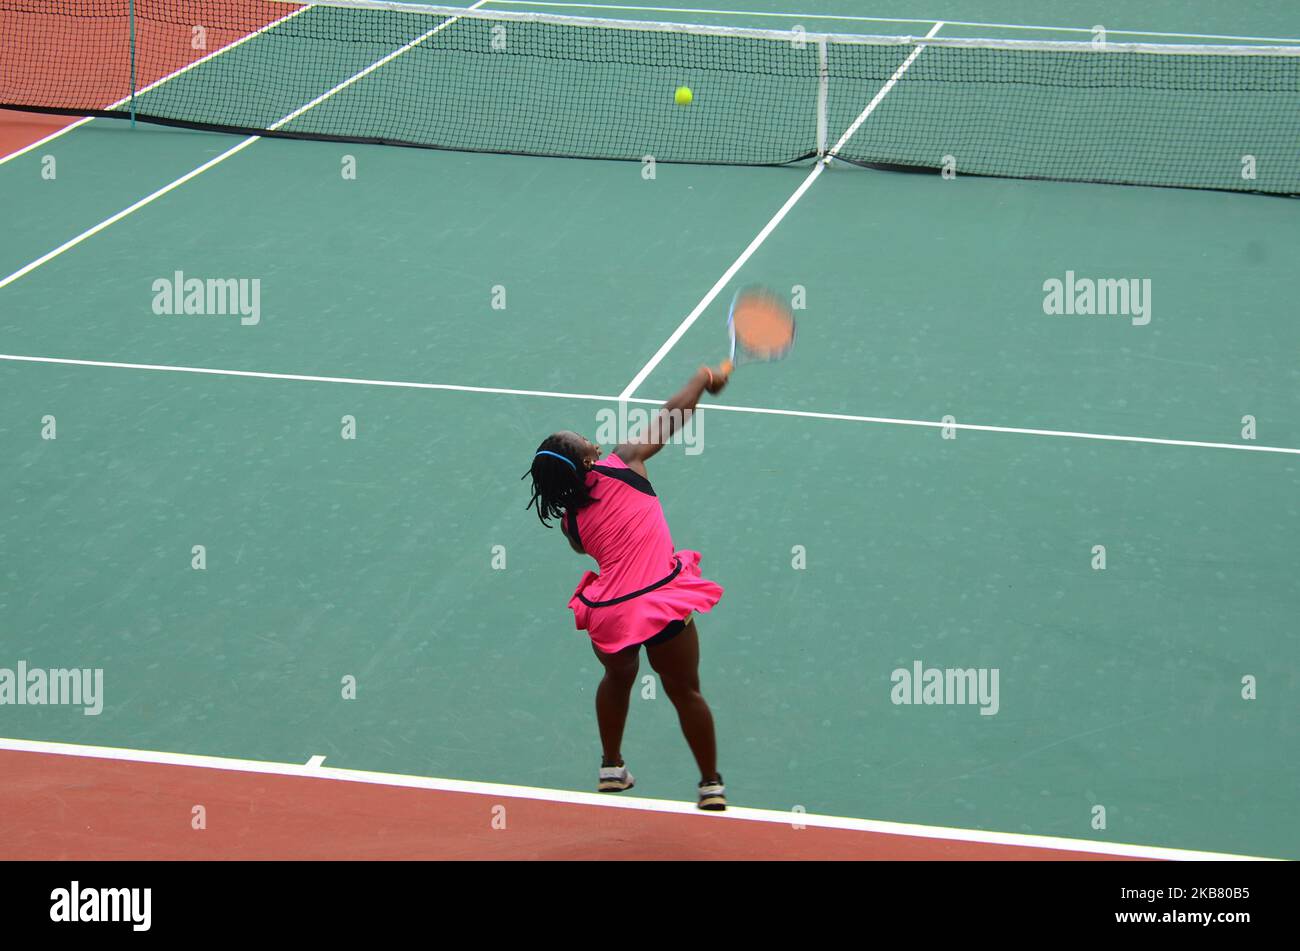 Blessing Samuel (NGA) plays against Peace Udoh (NGA) during their 1R Qualifying match at Lagos Open 2019 on 7th October 2019 in Lagos, Nigeria. (Photo by Olukayode Jaiyeola/NurPhoto) Stock Photo